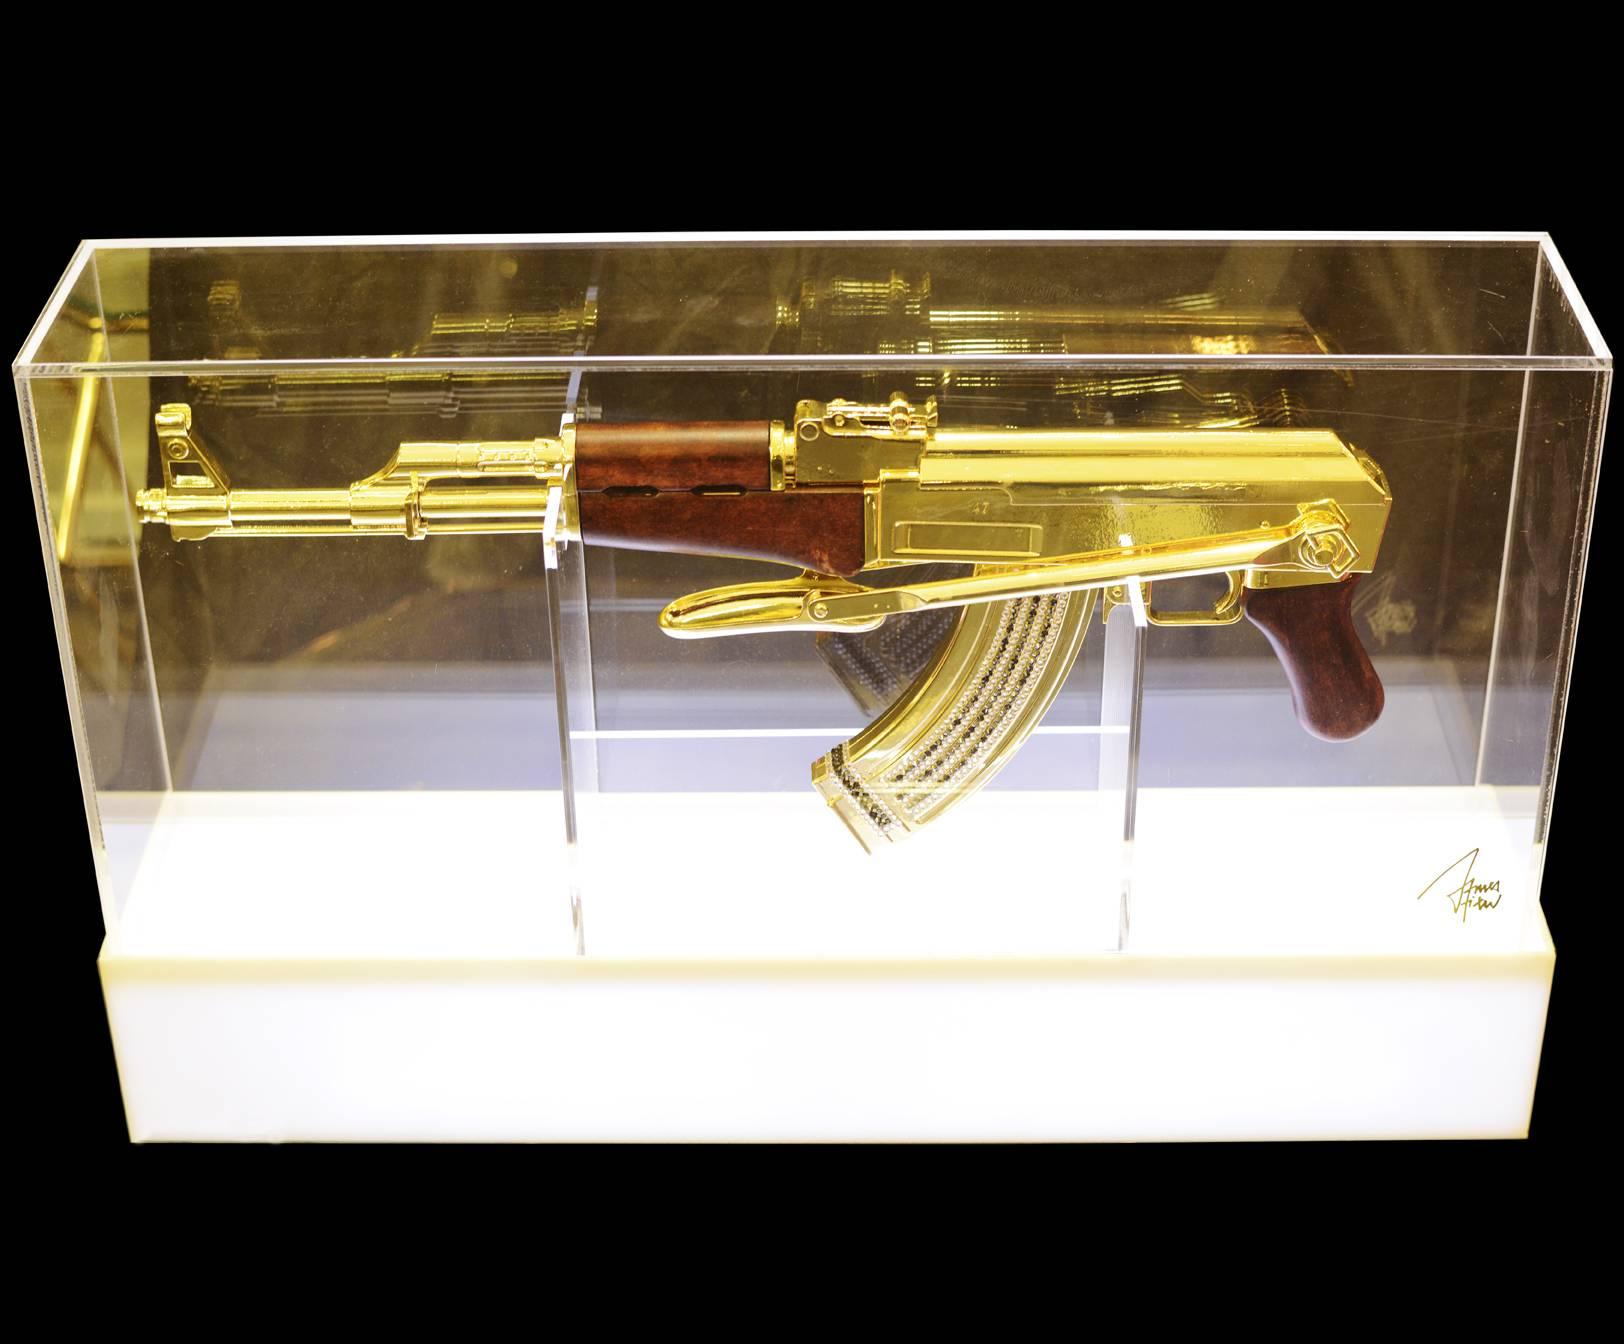 Assault rifle AK-47 in gold finish.
Authentic Limited Edition piece,
Numbered 01/15. Finish with gold leaf.
Base on plexiglass with LED light
and system of color variation and intensity.
Incorporated. Transparent plexiglass cover.
Plexi on